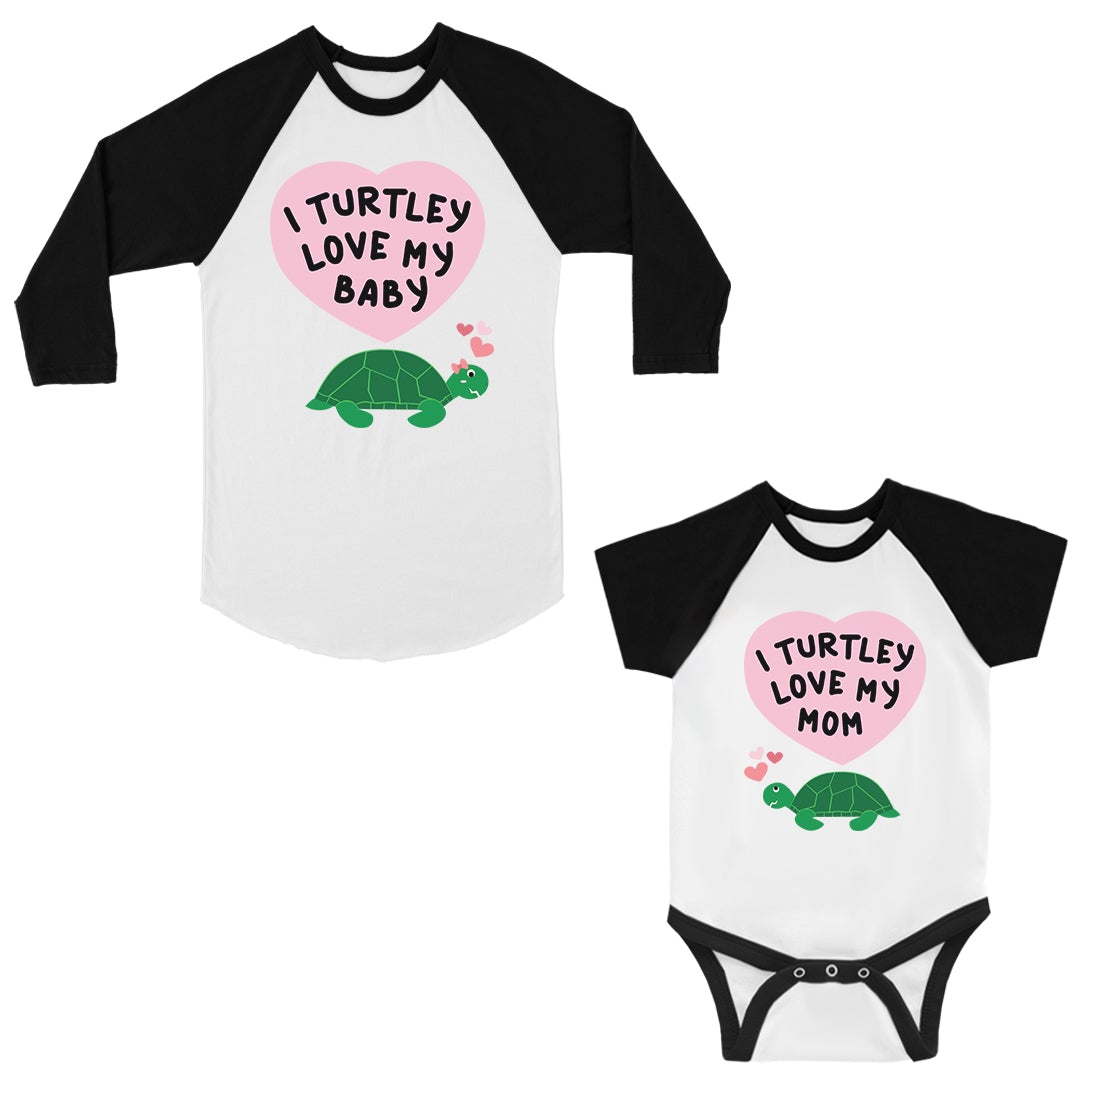 Turtley Love Baby Mom Mom and Baby Matching Baseball Jerseys Gifts Black and White